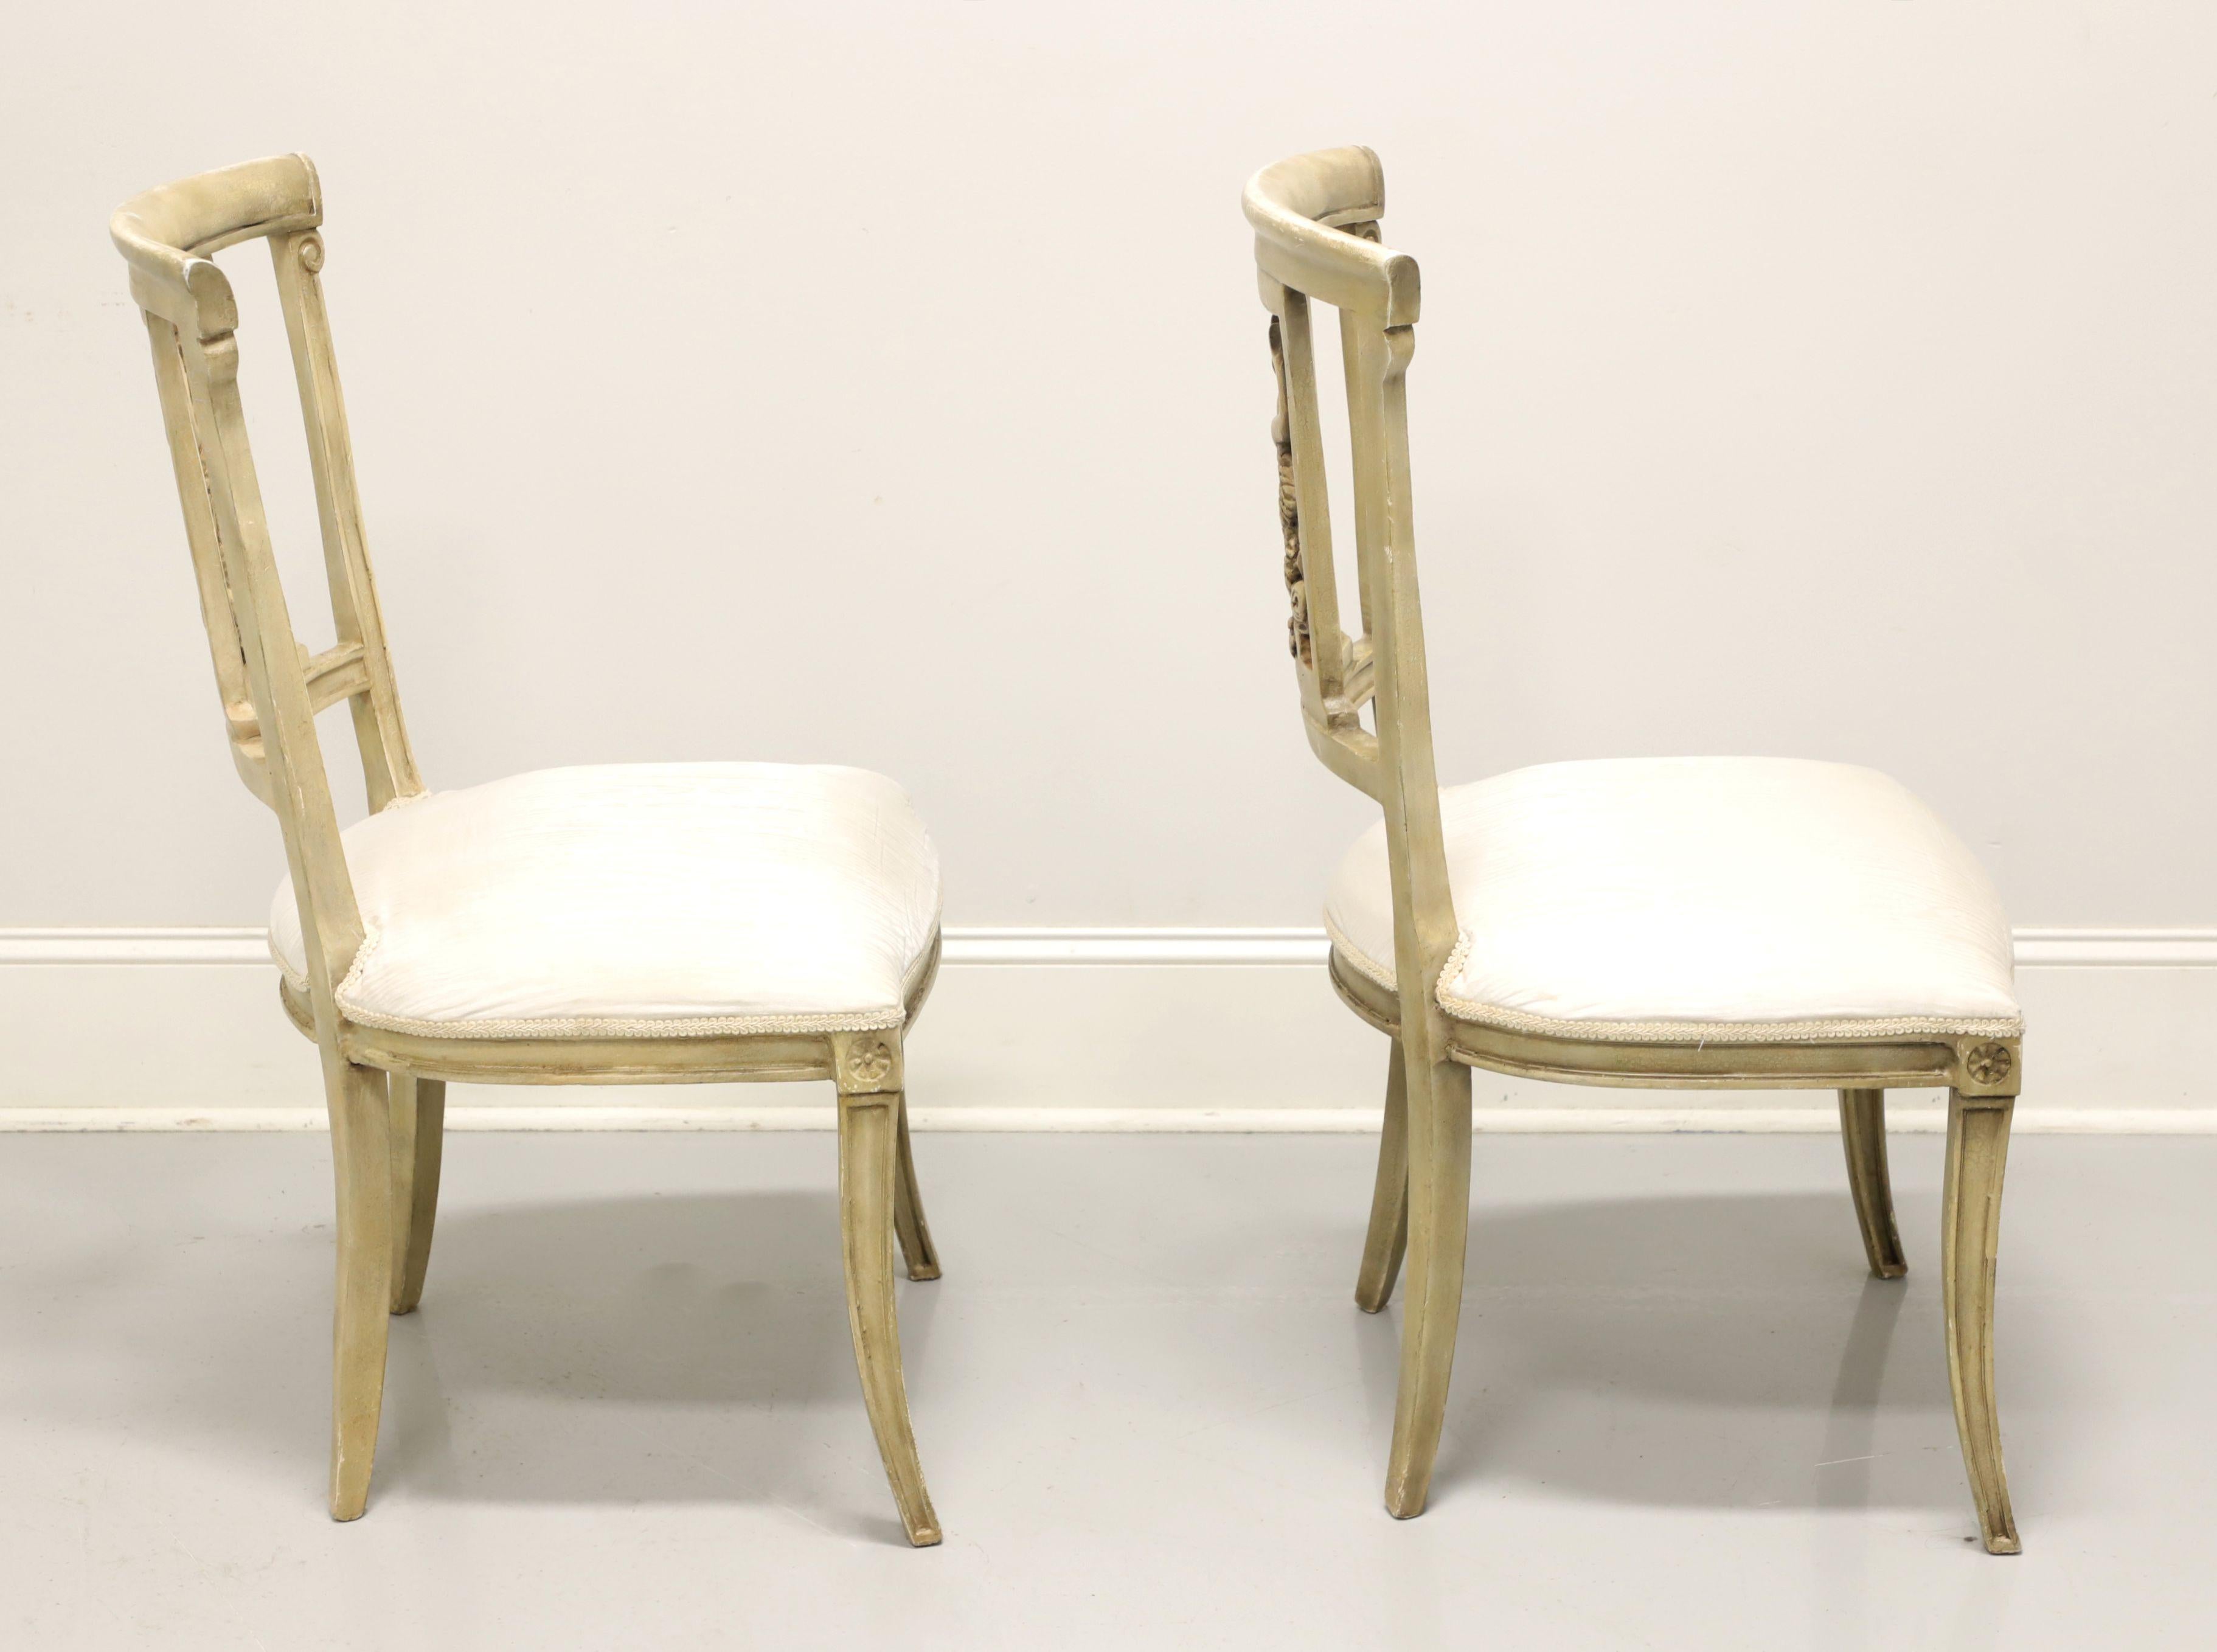 East Asian 20th Century Italian Impero Style Side Chairs - Pair For Sale